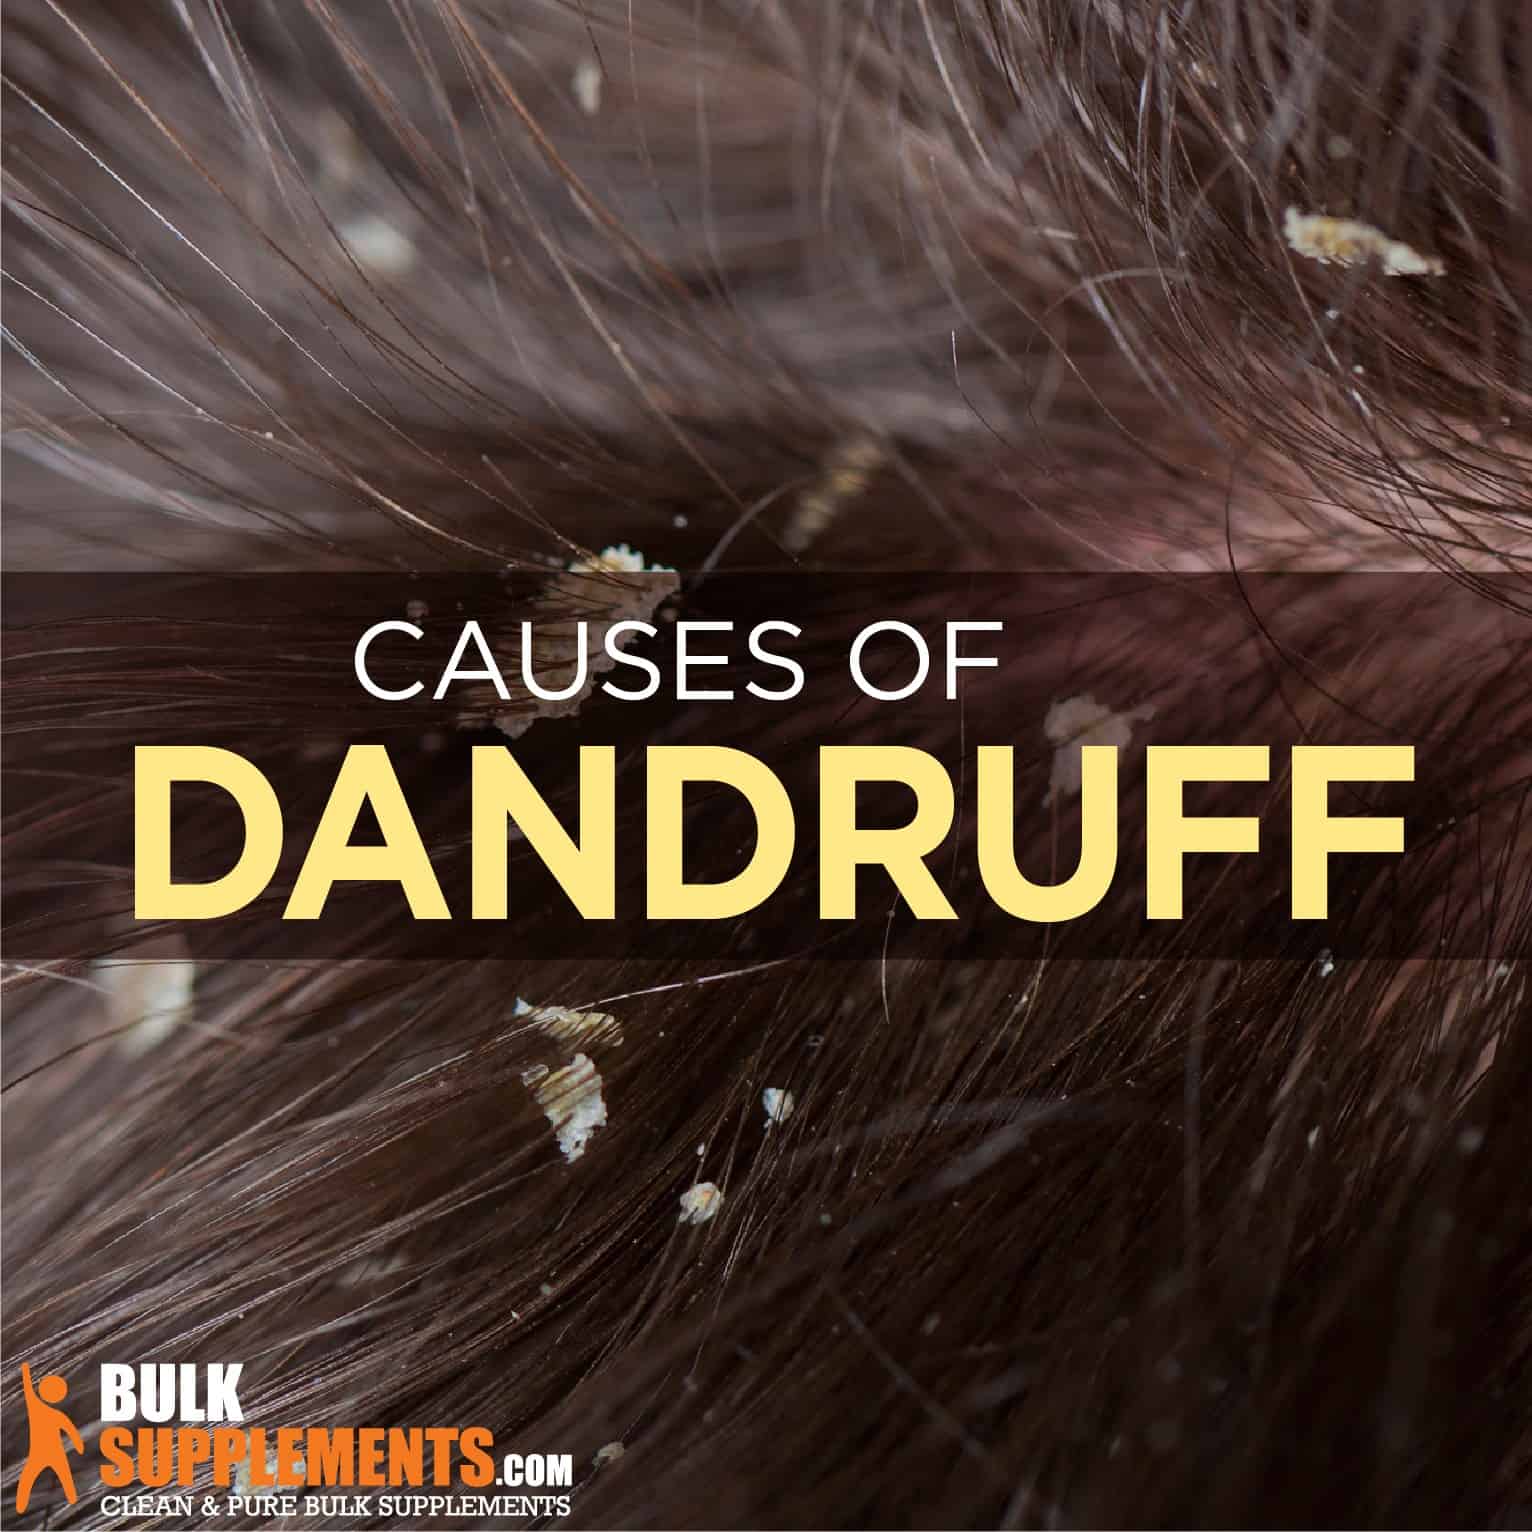 What is Dandruff: Causes, Symptoms & Treatment